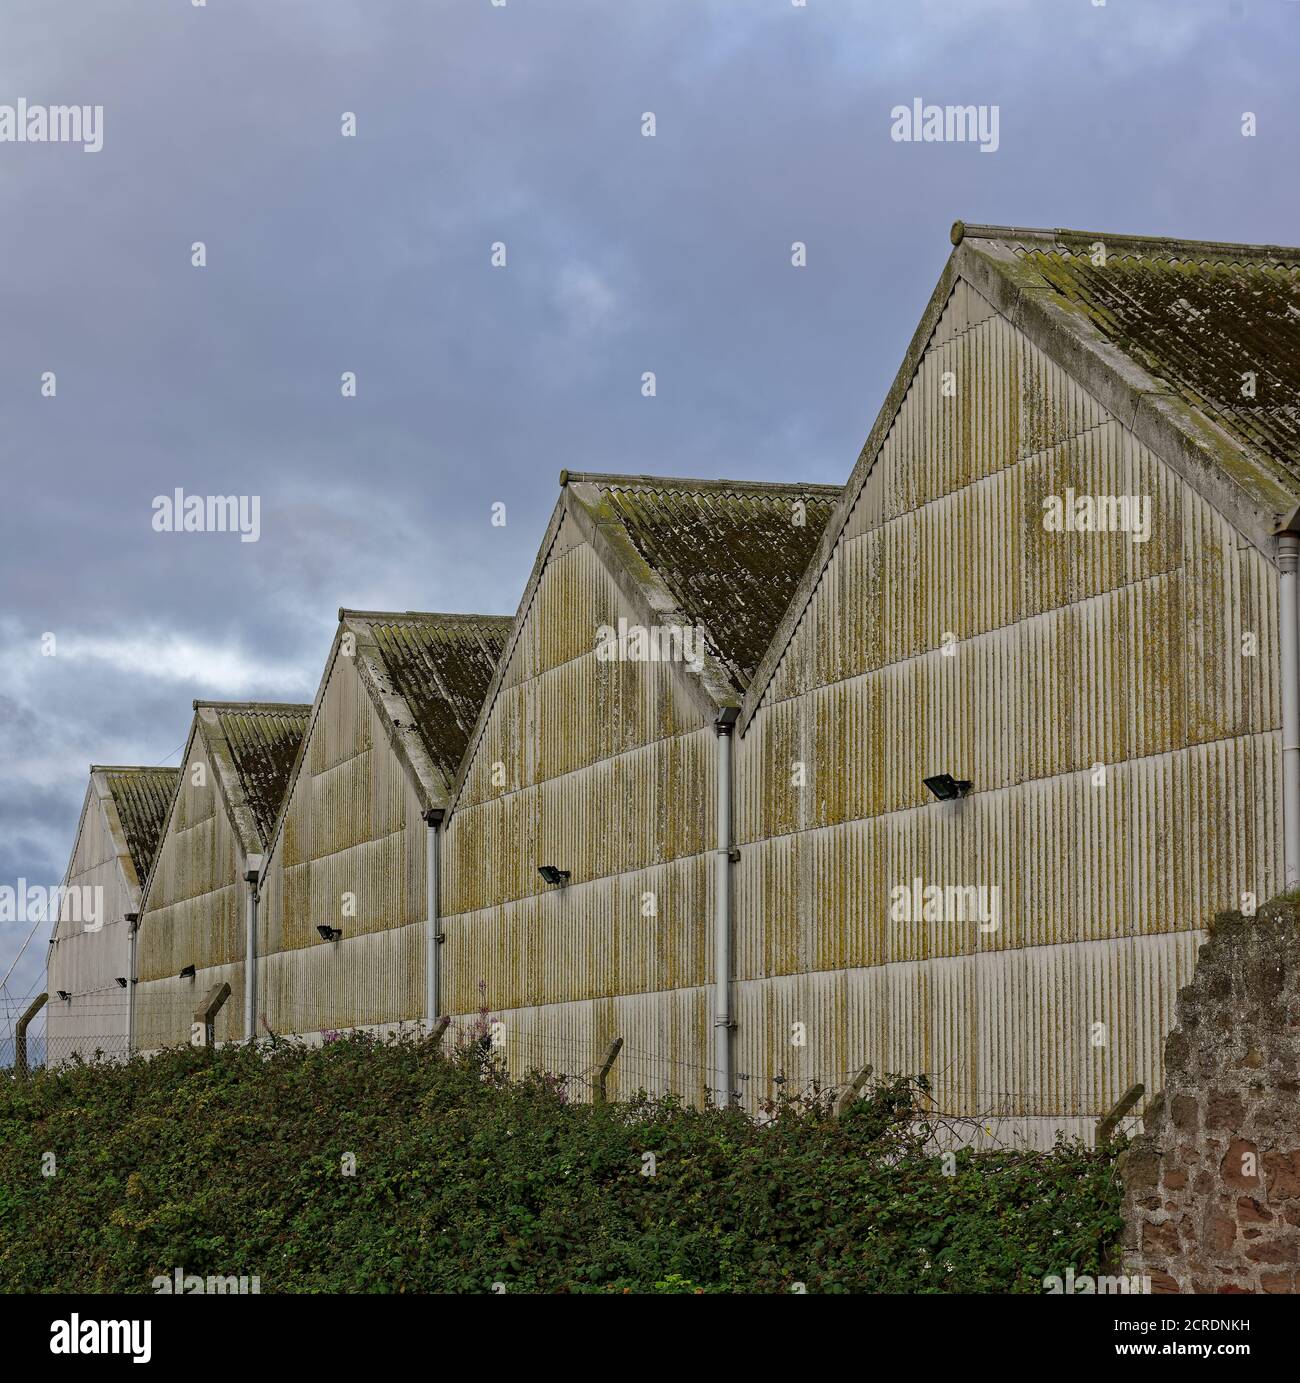 Five adjoined Old Warehouse buildings at Montrose Port, with their Galvanised cladding stained and covered in Mosses and Lichens over time. Stock Photo